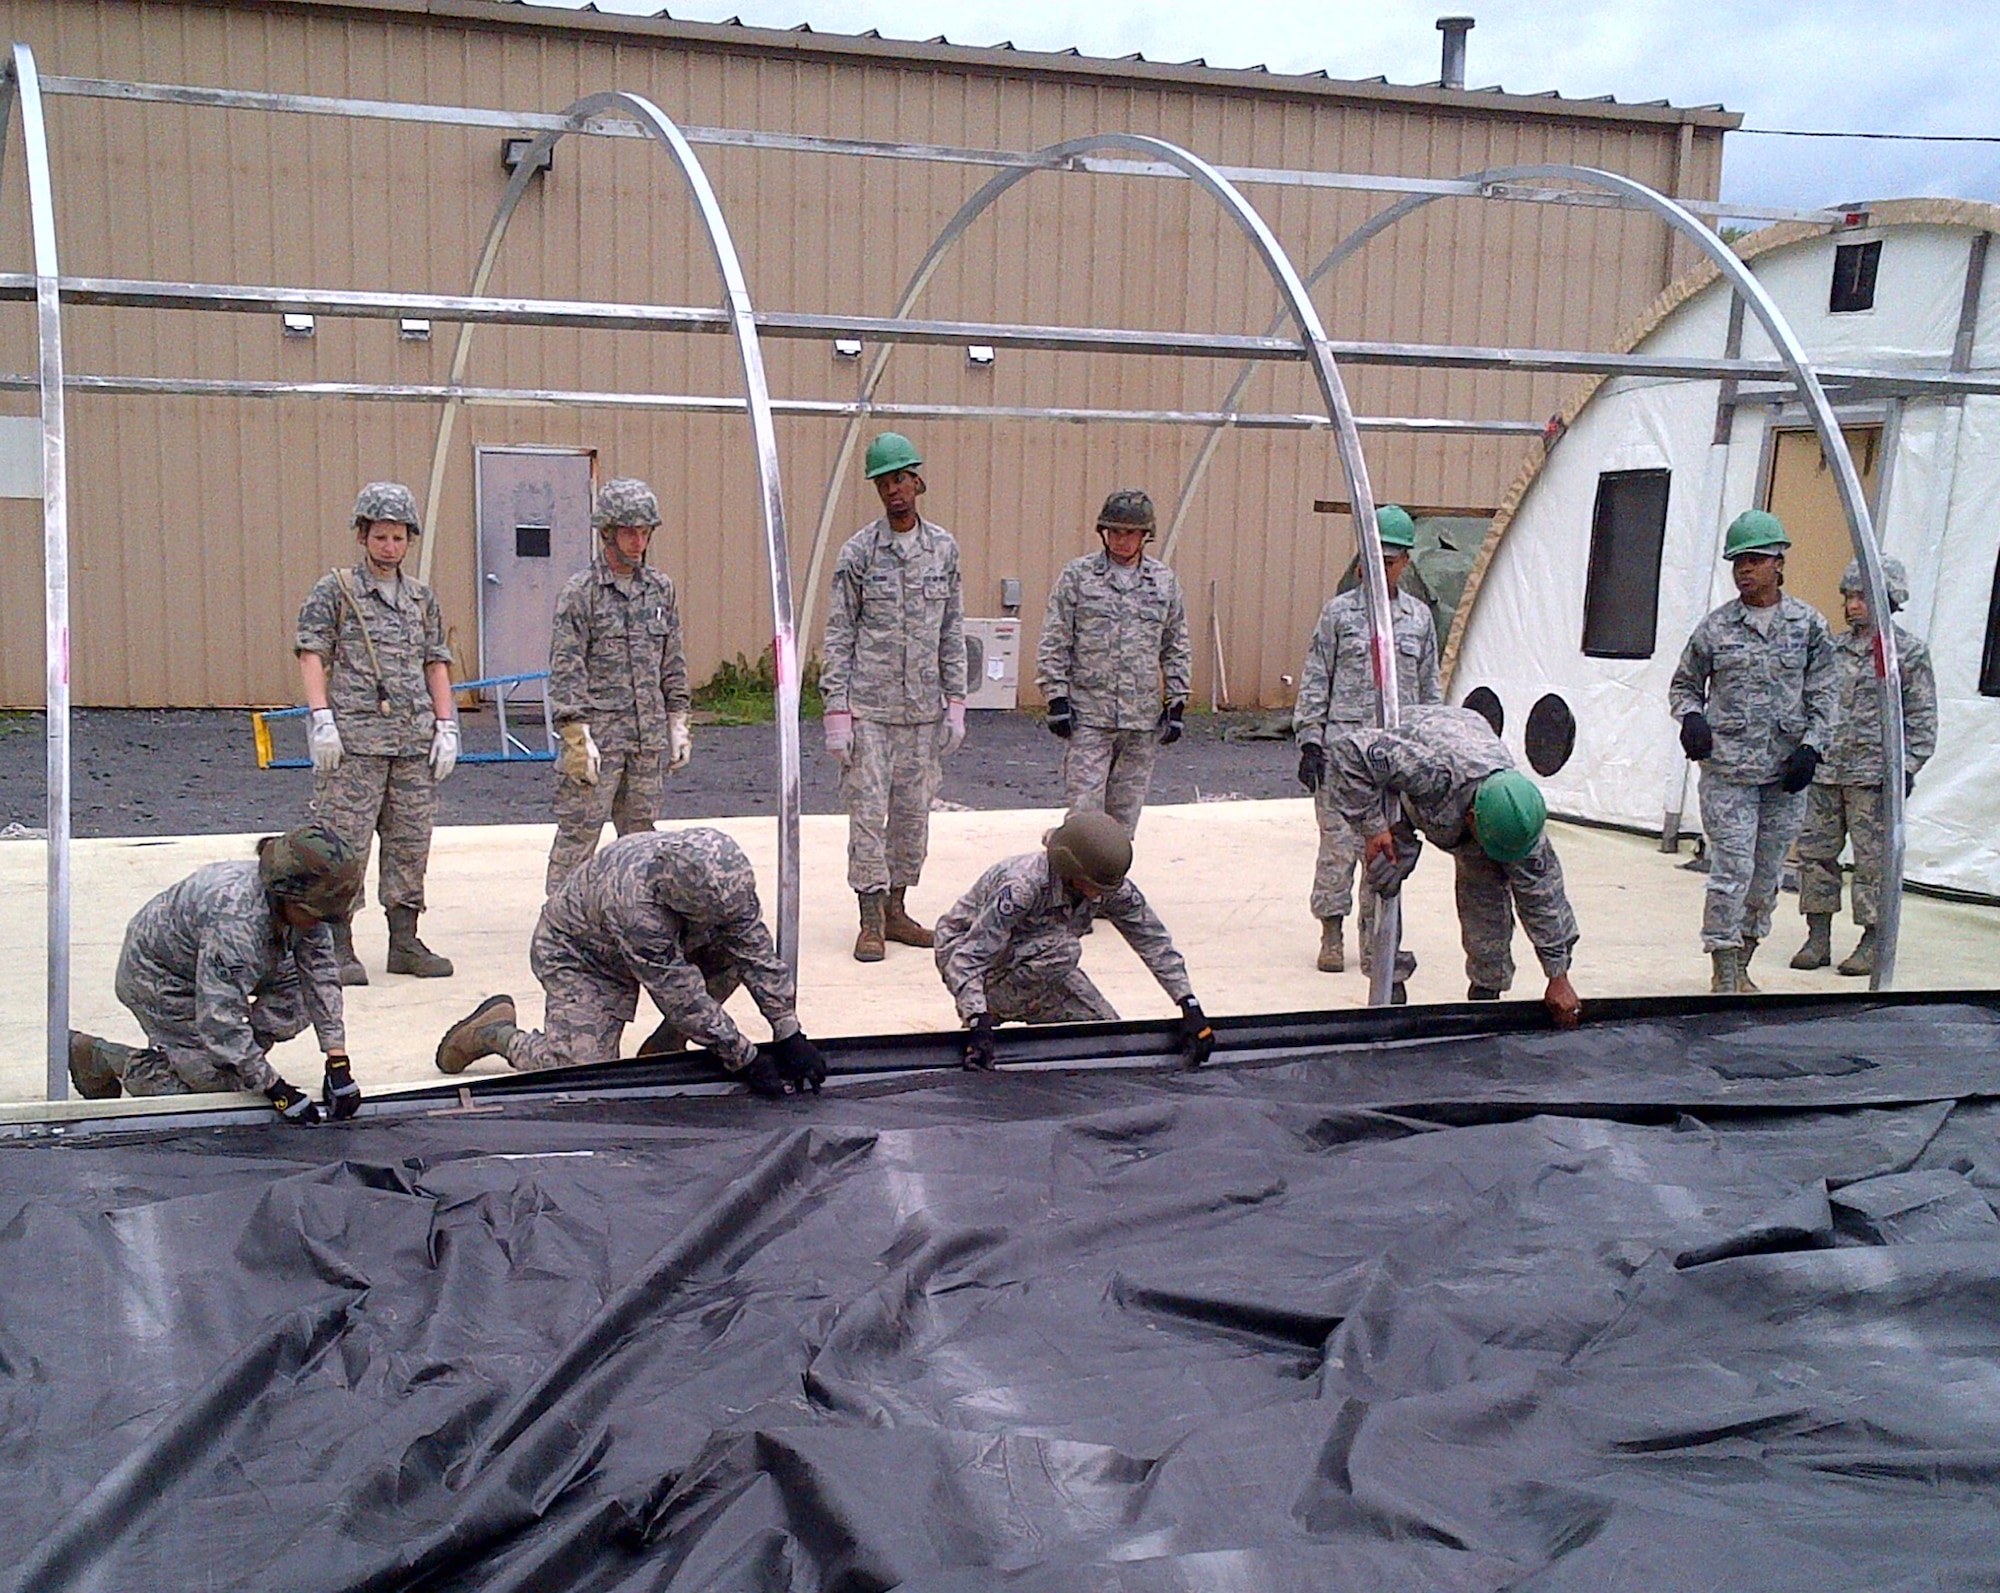 Airmen of all Air Force components work to construct a tent during a Silver Flag exercise, April 30, 2014 Dobbins Air Reserve Base Georgia. During the week-long course, 914th Airlift Wing Airmen from the Force Support Squadron —Services and Personnel Support for Contingency Operations, PERSCO, —built and maintained bare-base operations at mock forward-deployed locations as well as honed a variety of AFSC-related skills. (U.S. Air Force courtesy photo)